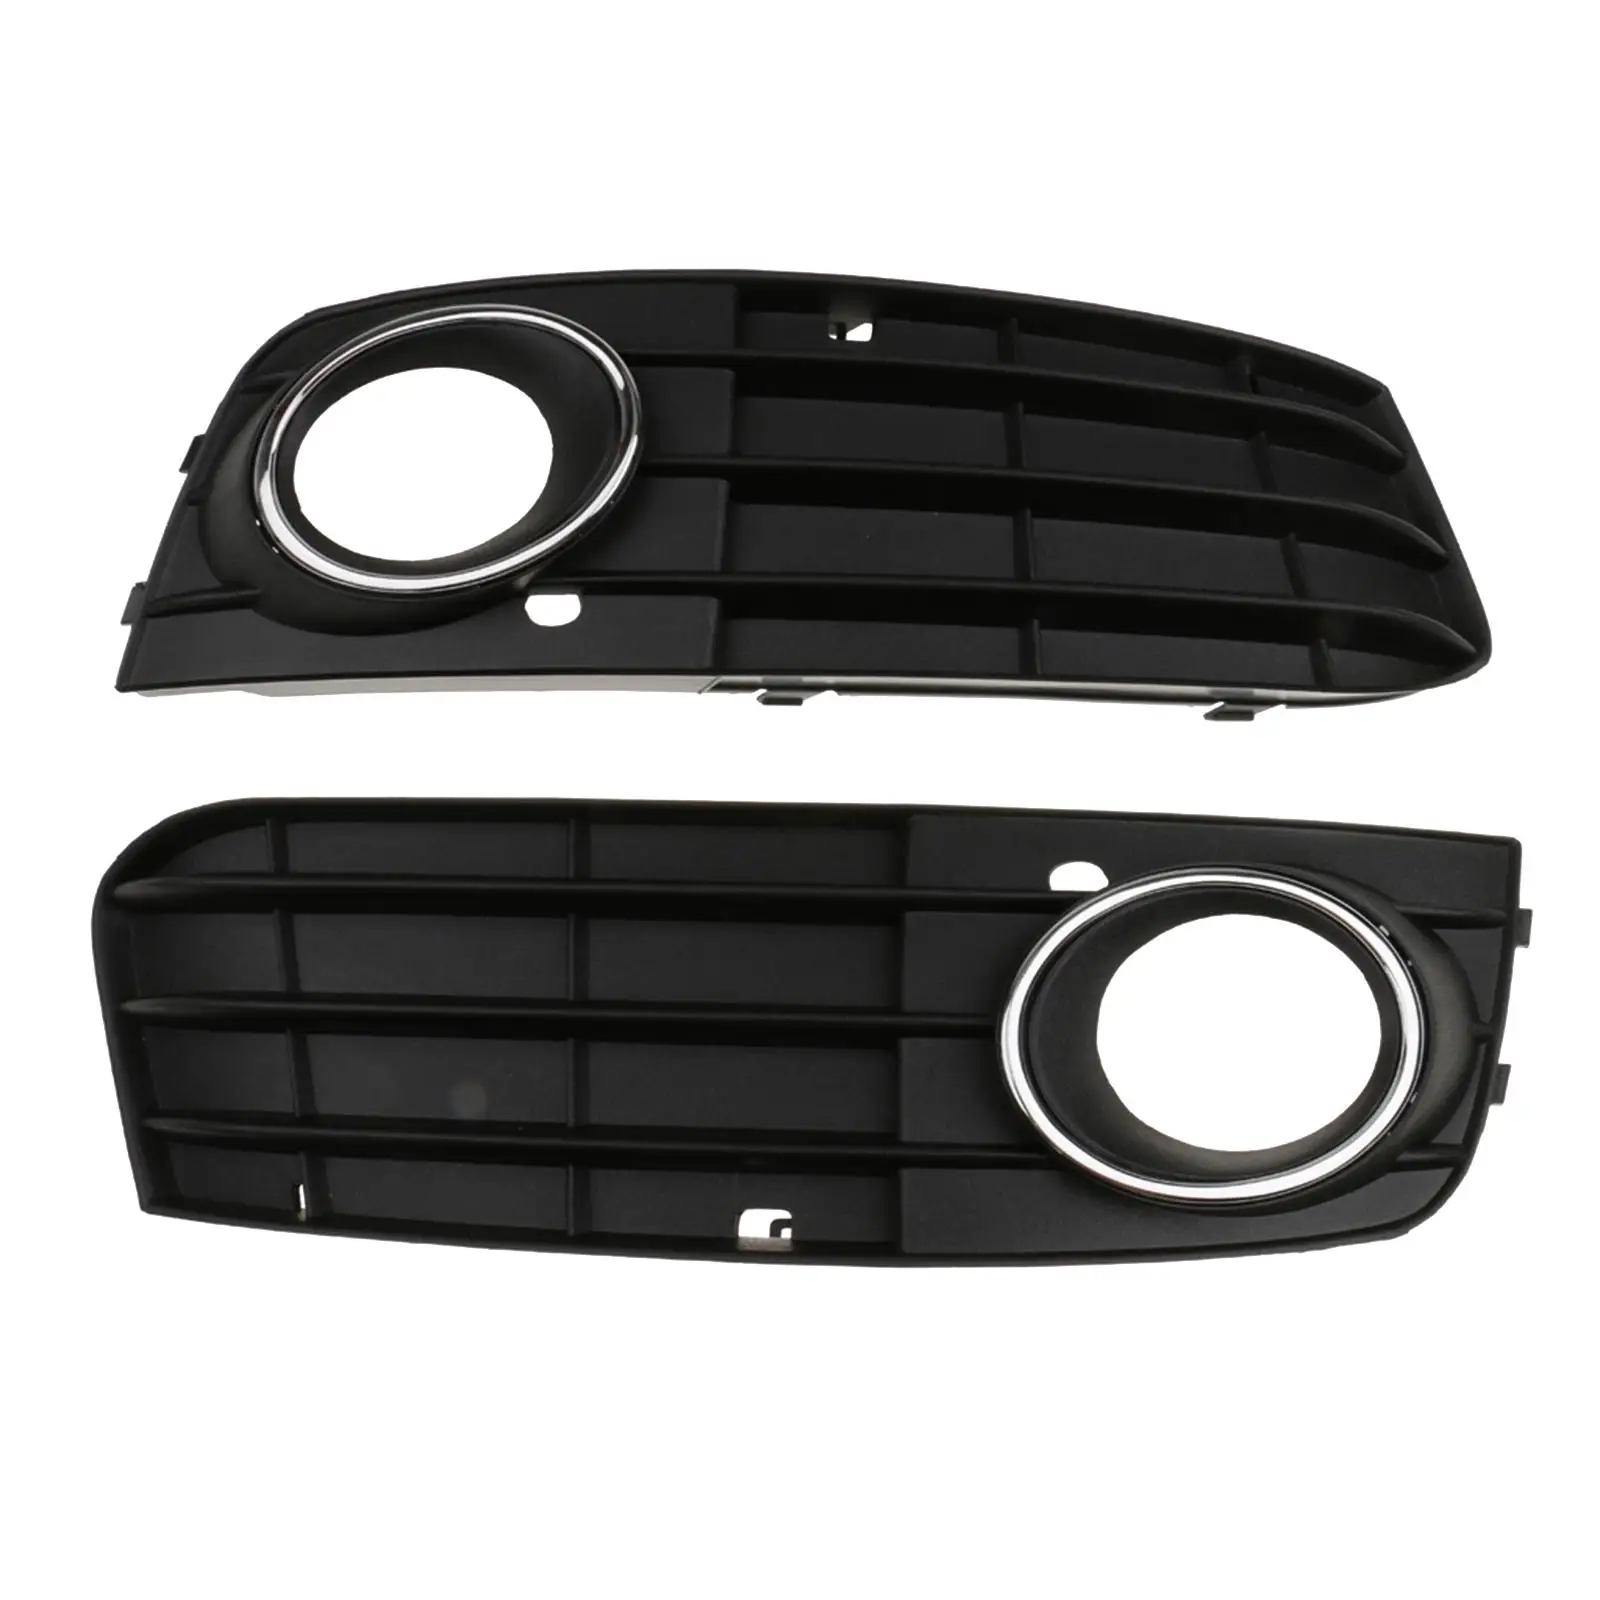 1 Front Lower Grille Shell for audi A4 A4L B8 2009-2011